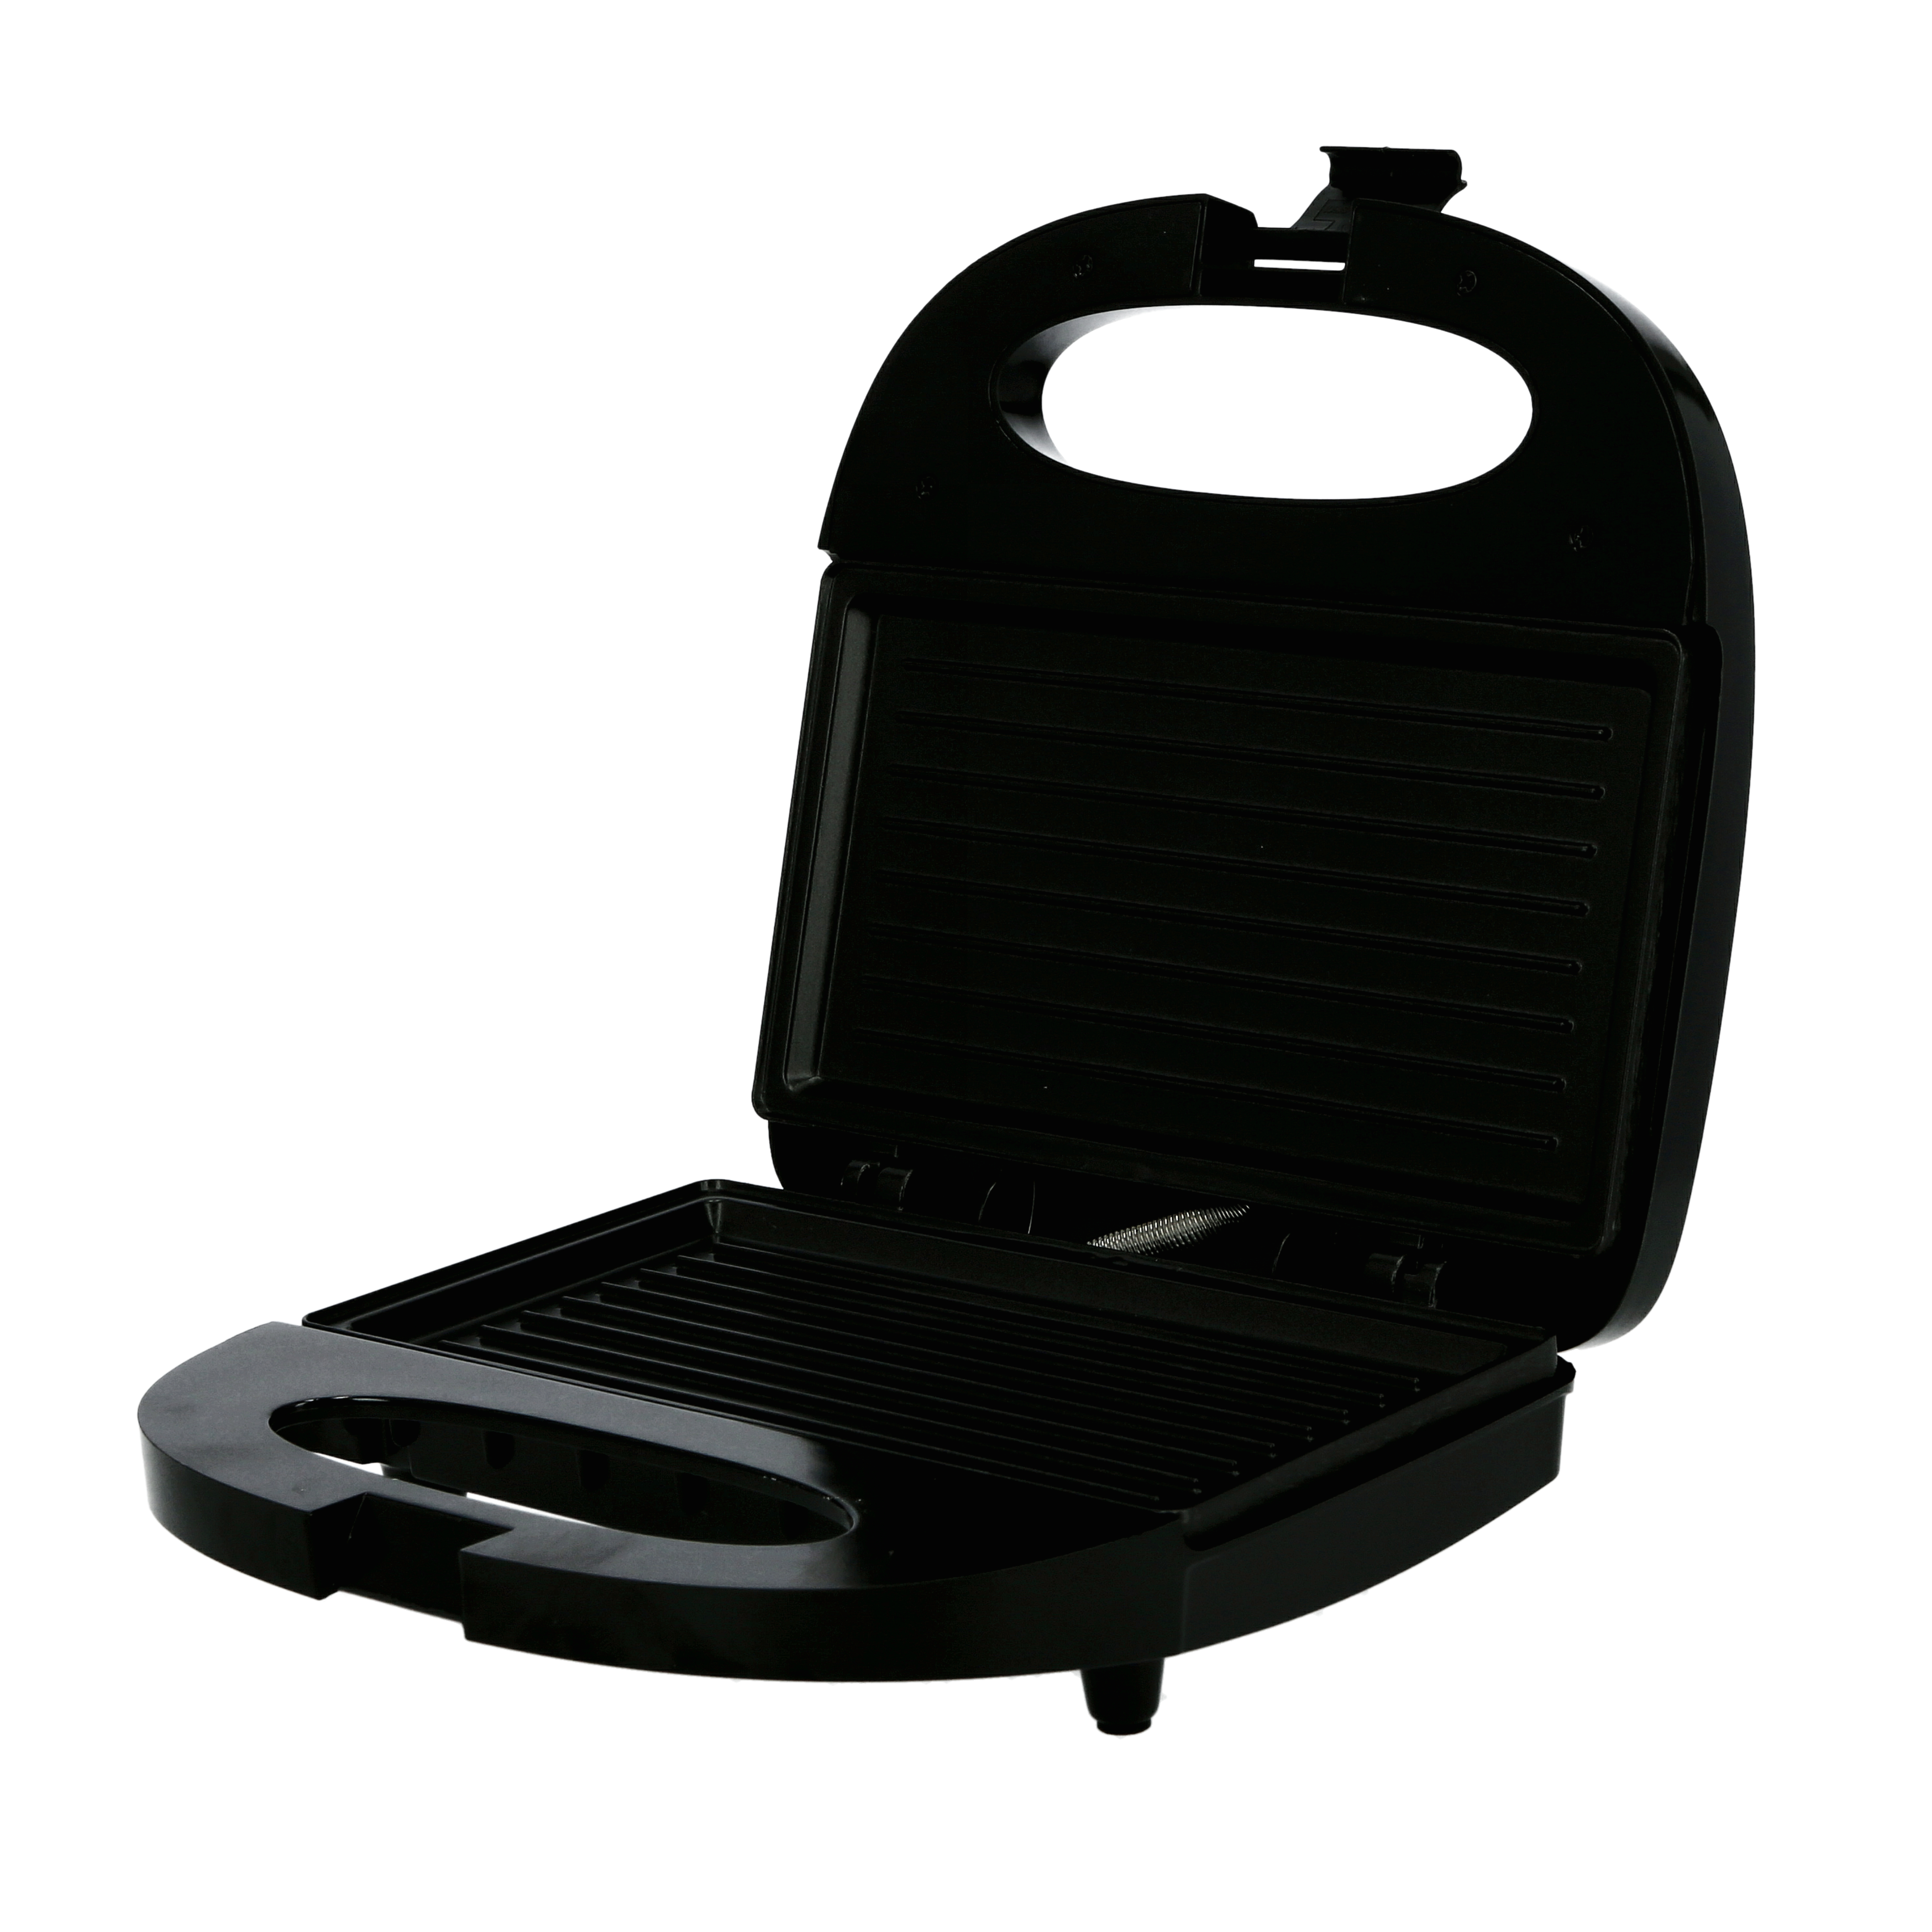 Olsenmark - OMGM2320 750W Grill Maker, Non-Stick Plates Grill Maker | Handle Locking System | Ideal for Breakfast | Overheat Protection